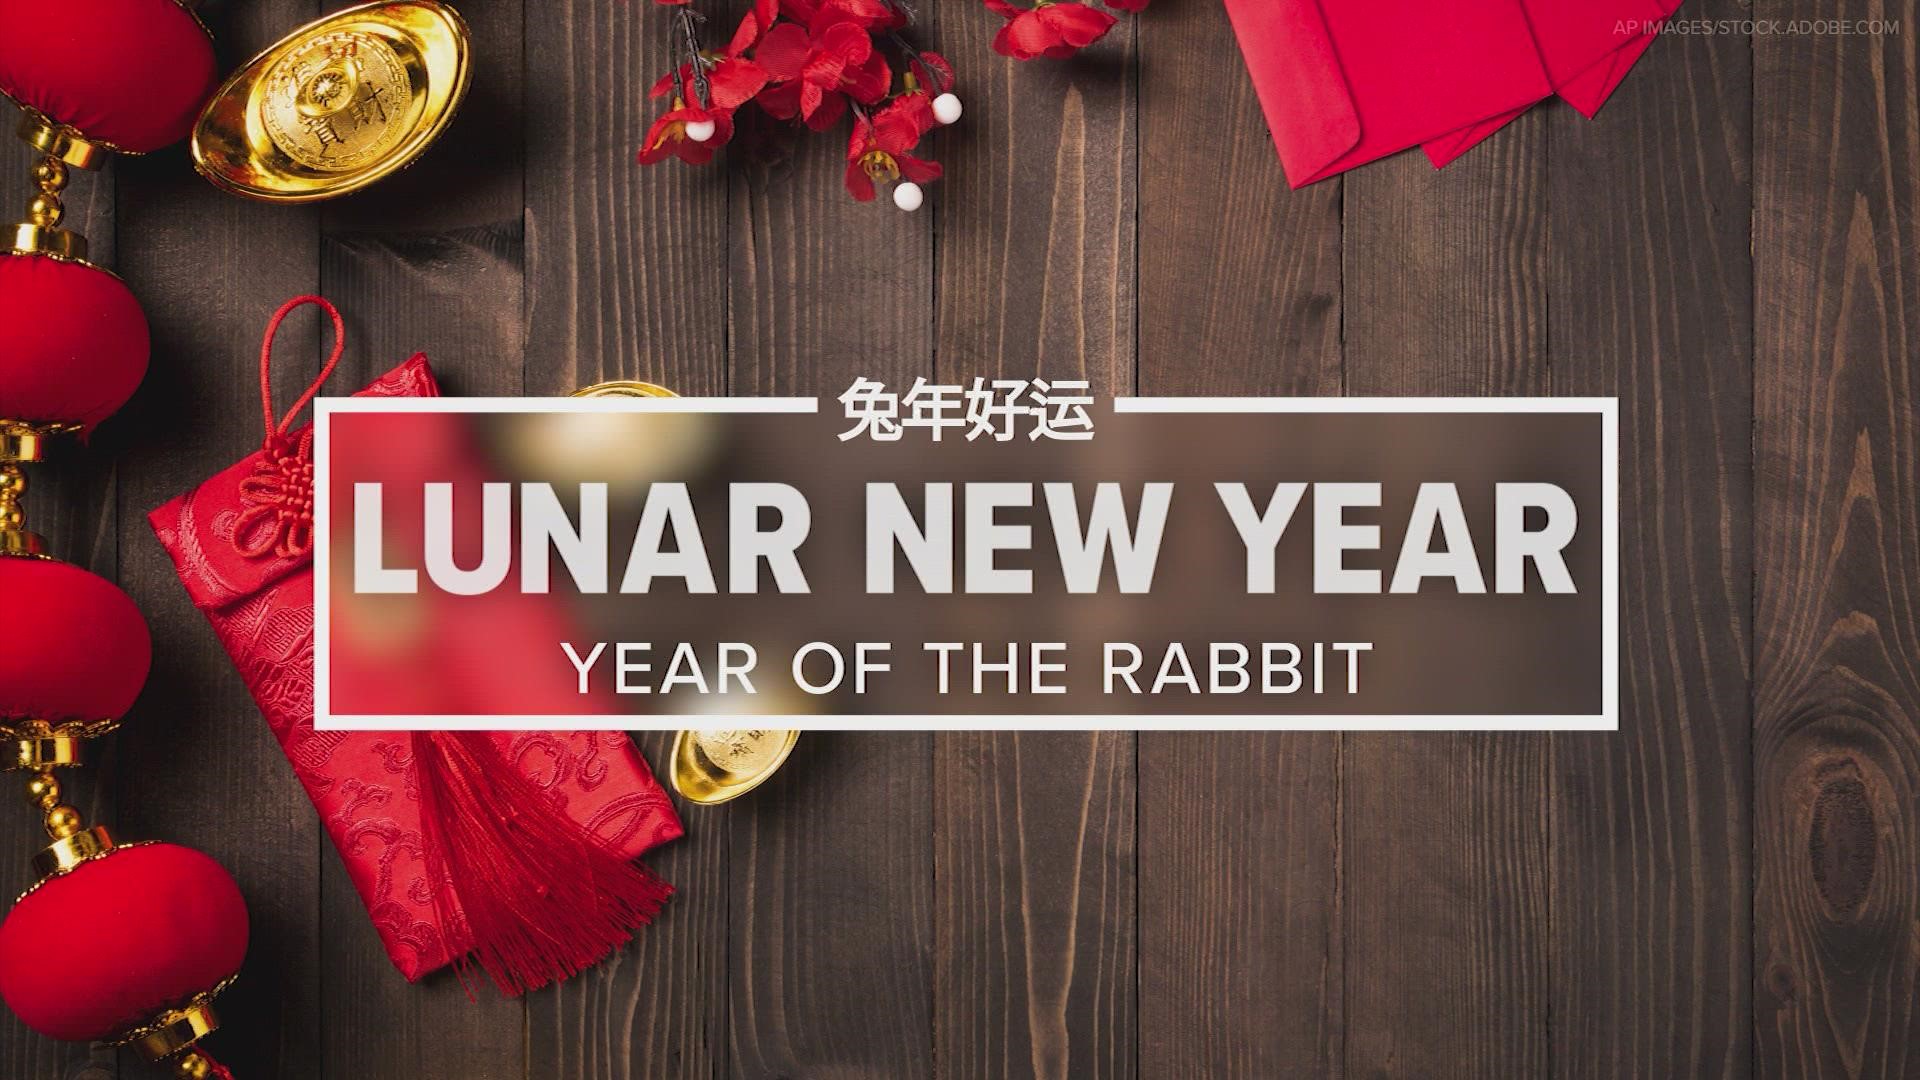 How we got our Holidays: Lunar New Year 2023 